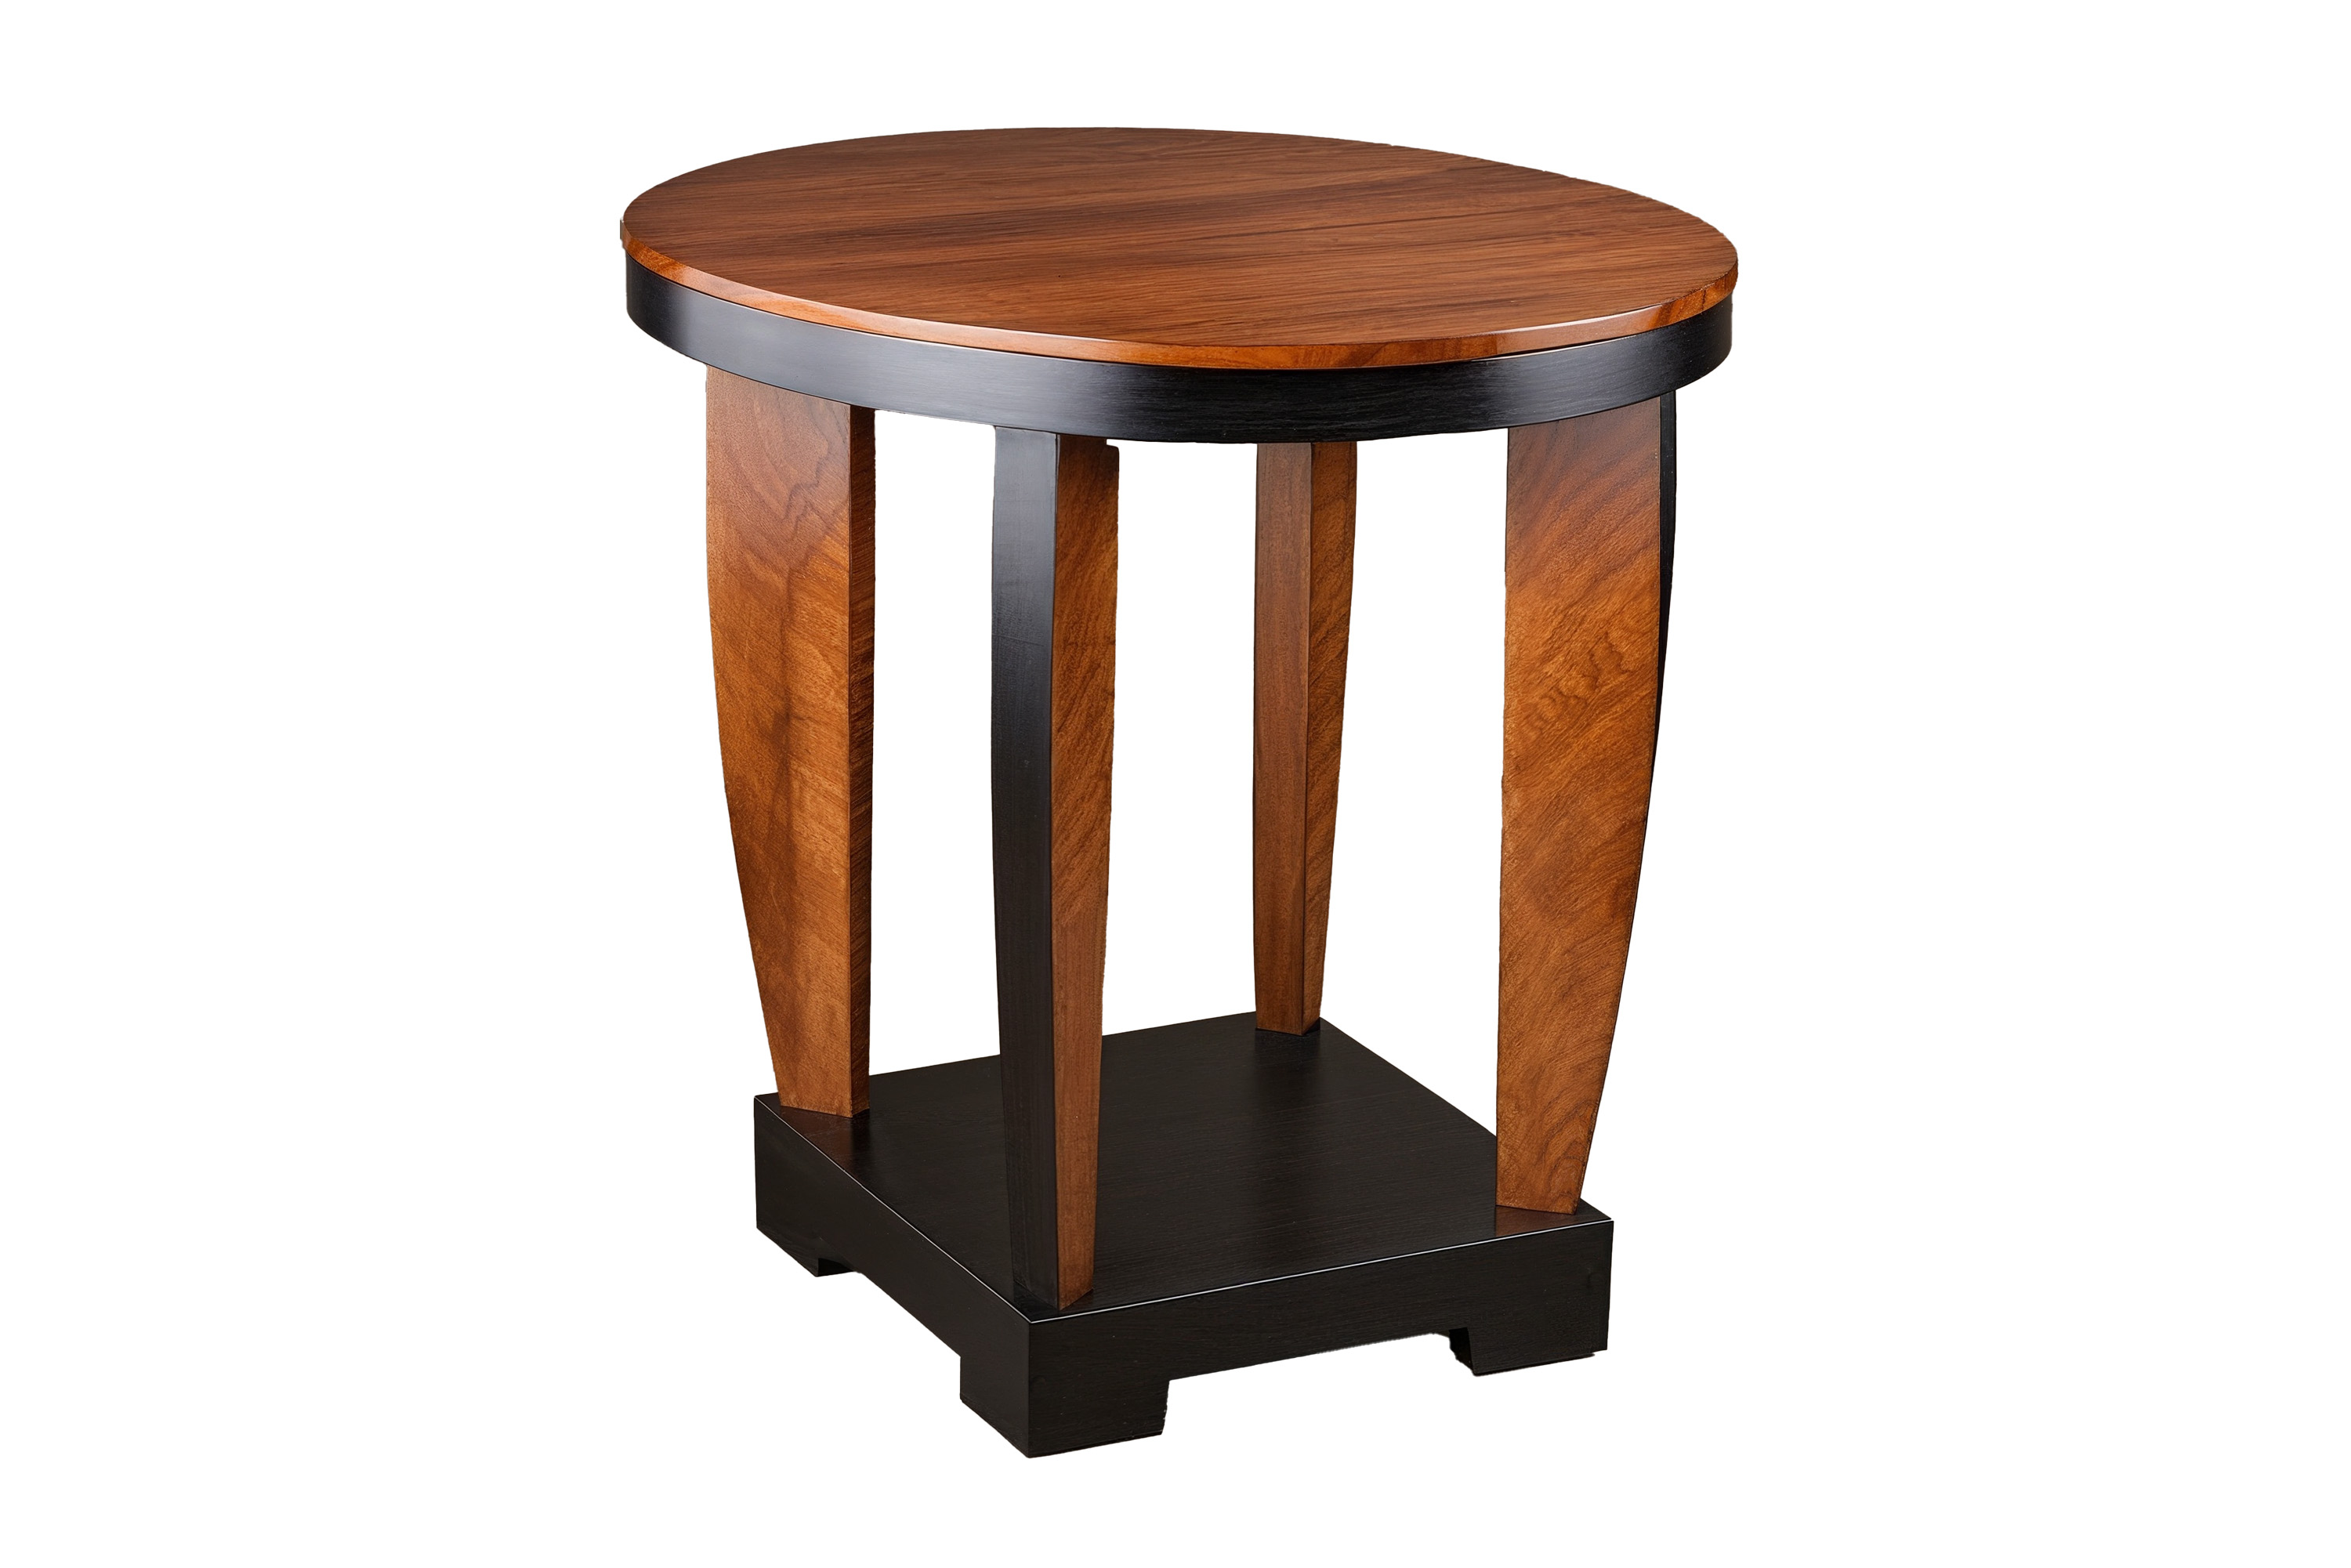 Art Deco side table with walnut and black lacquer